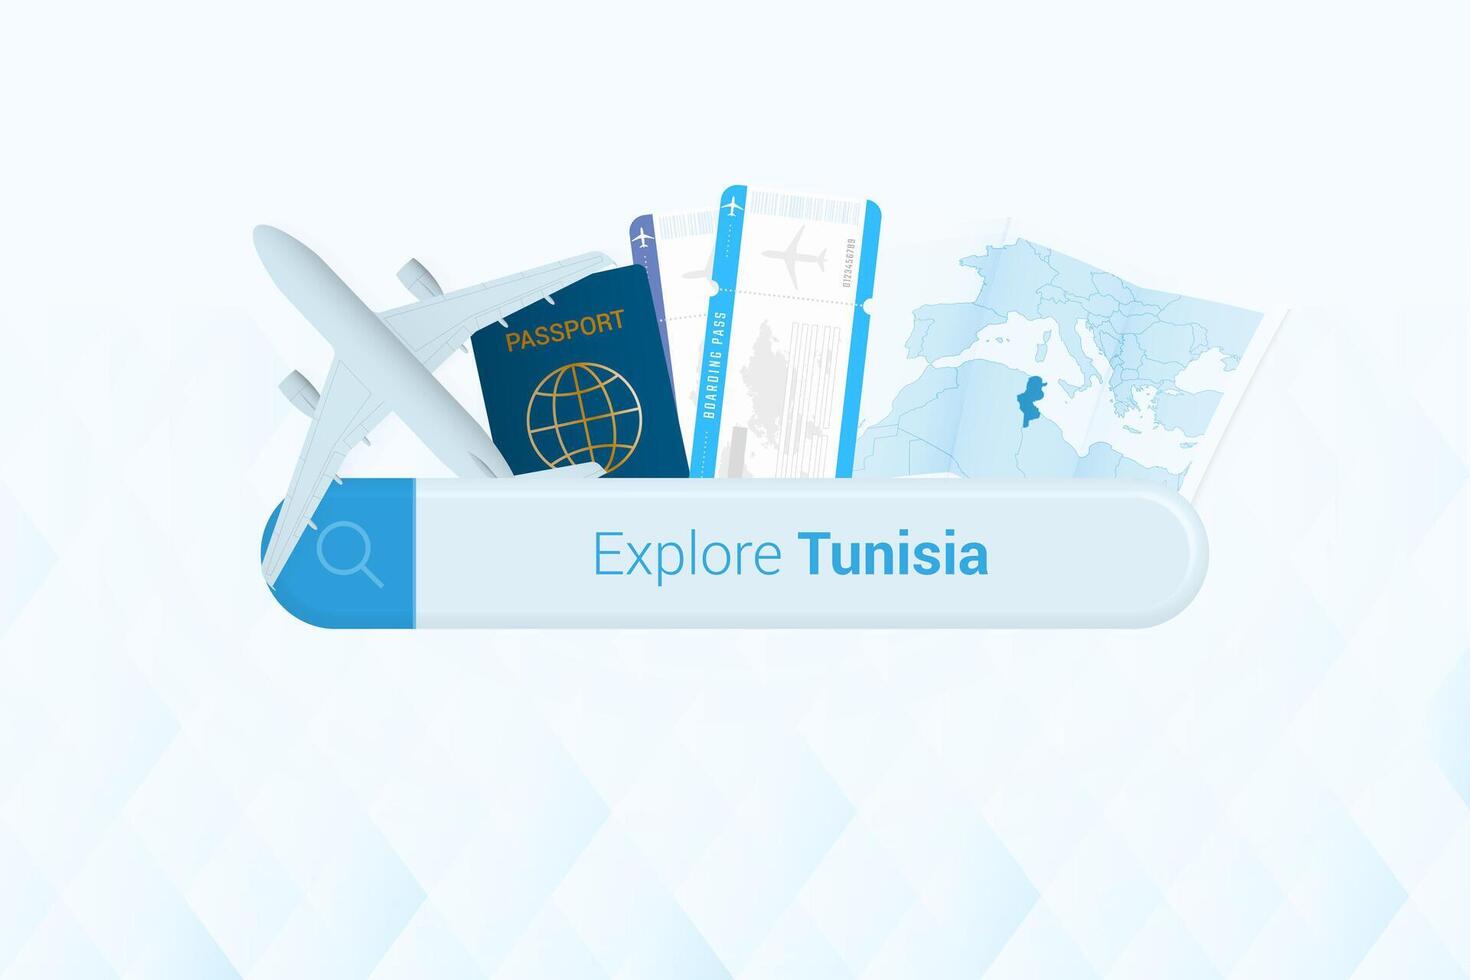 Searching tickets to Tunisia or travel destination in Tunisia. Searching bar with airplane, passport, boarding pass, tickets and map. vector